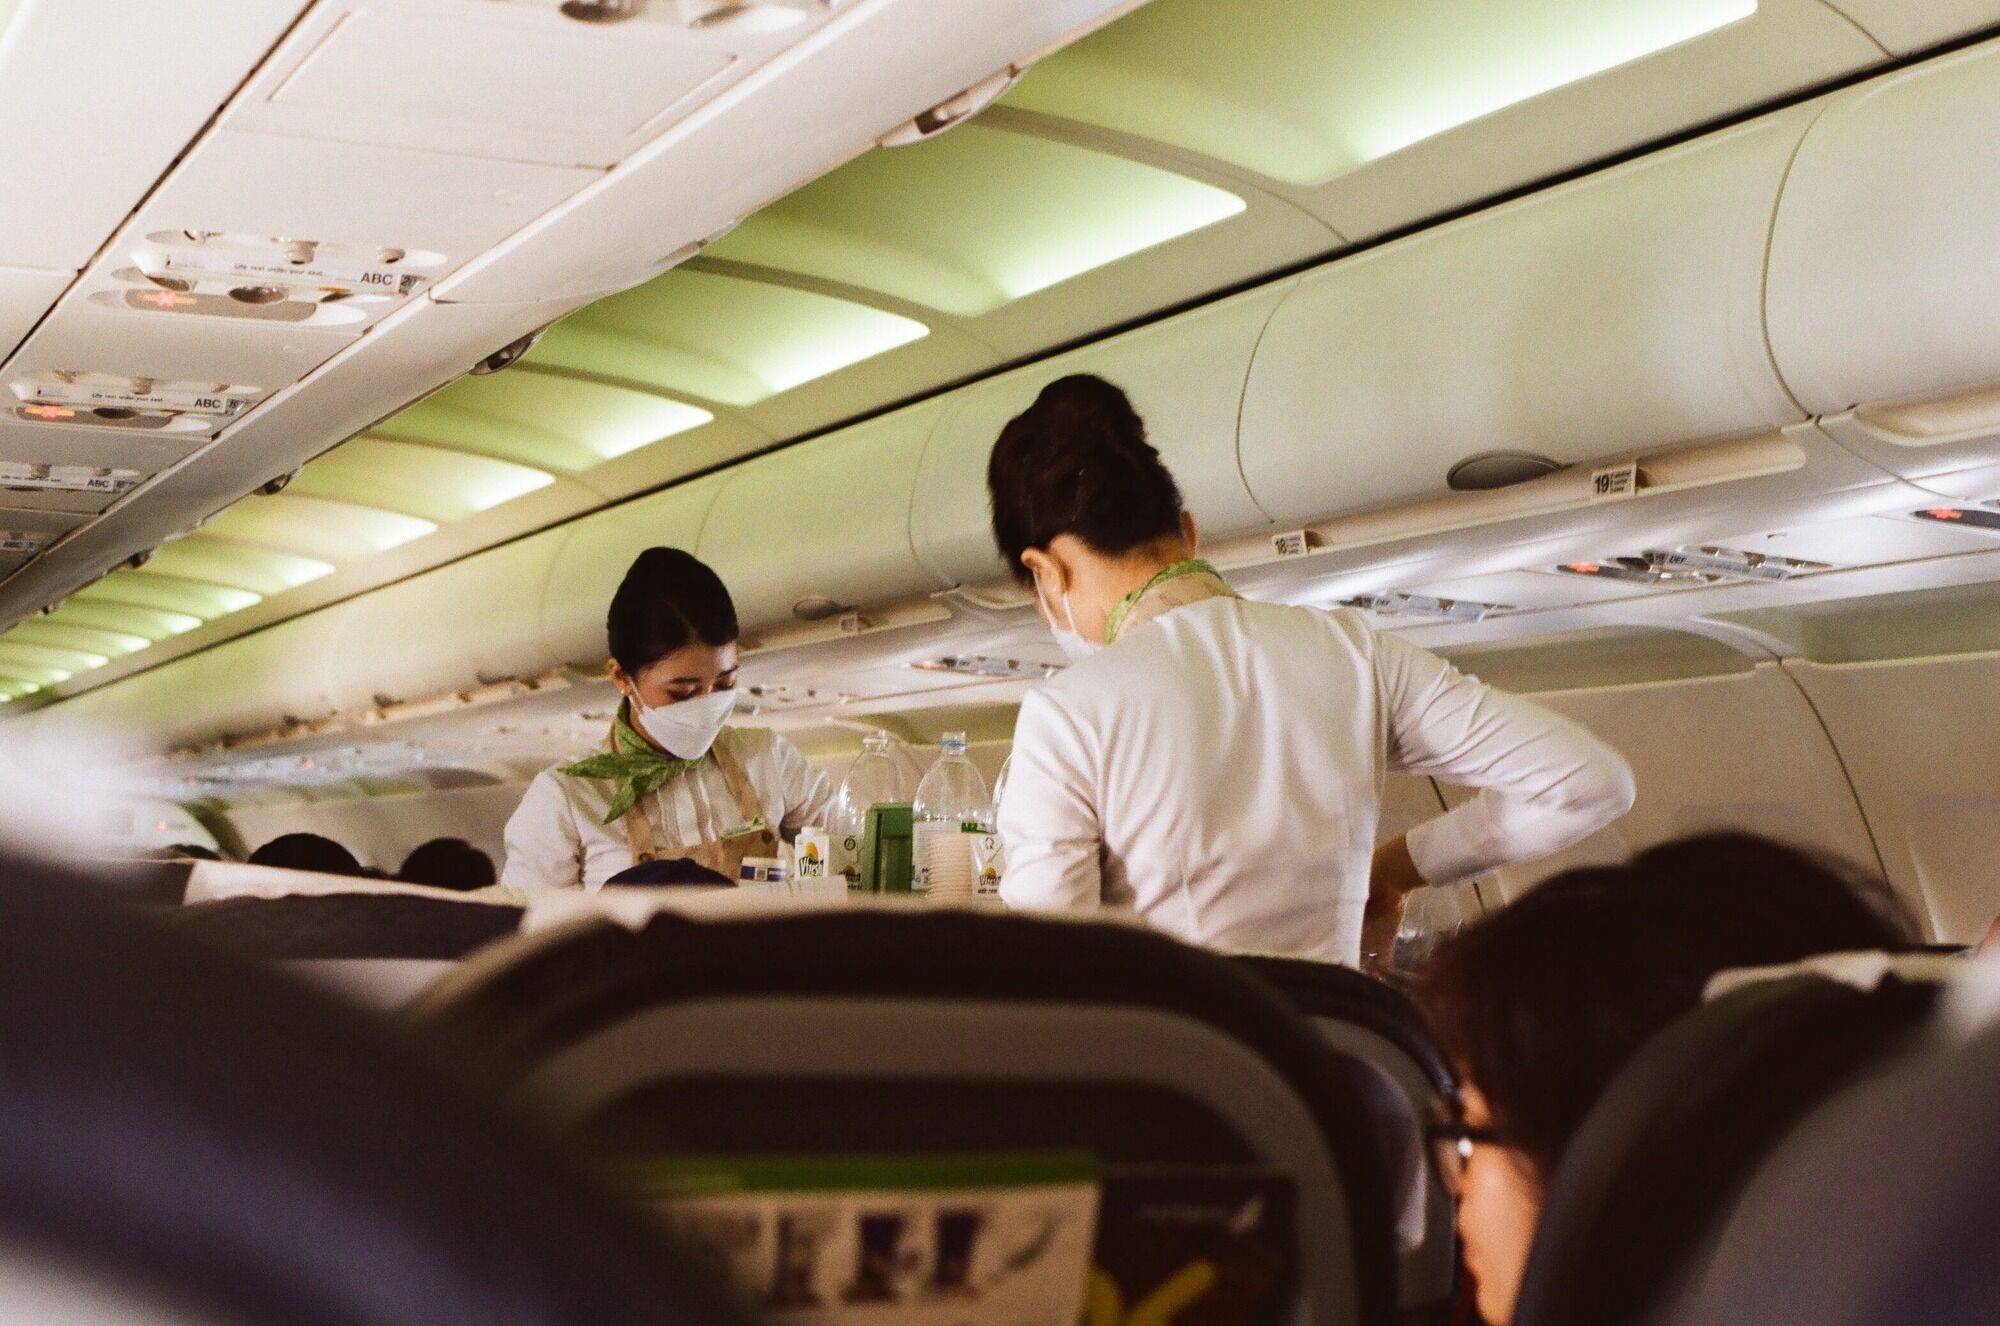 Stewardess answers 5 frequently asked questions about her job that passengers are concerned about